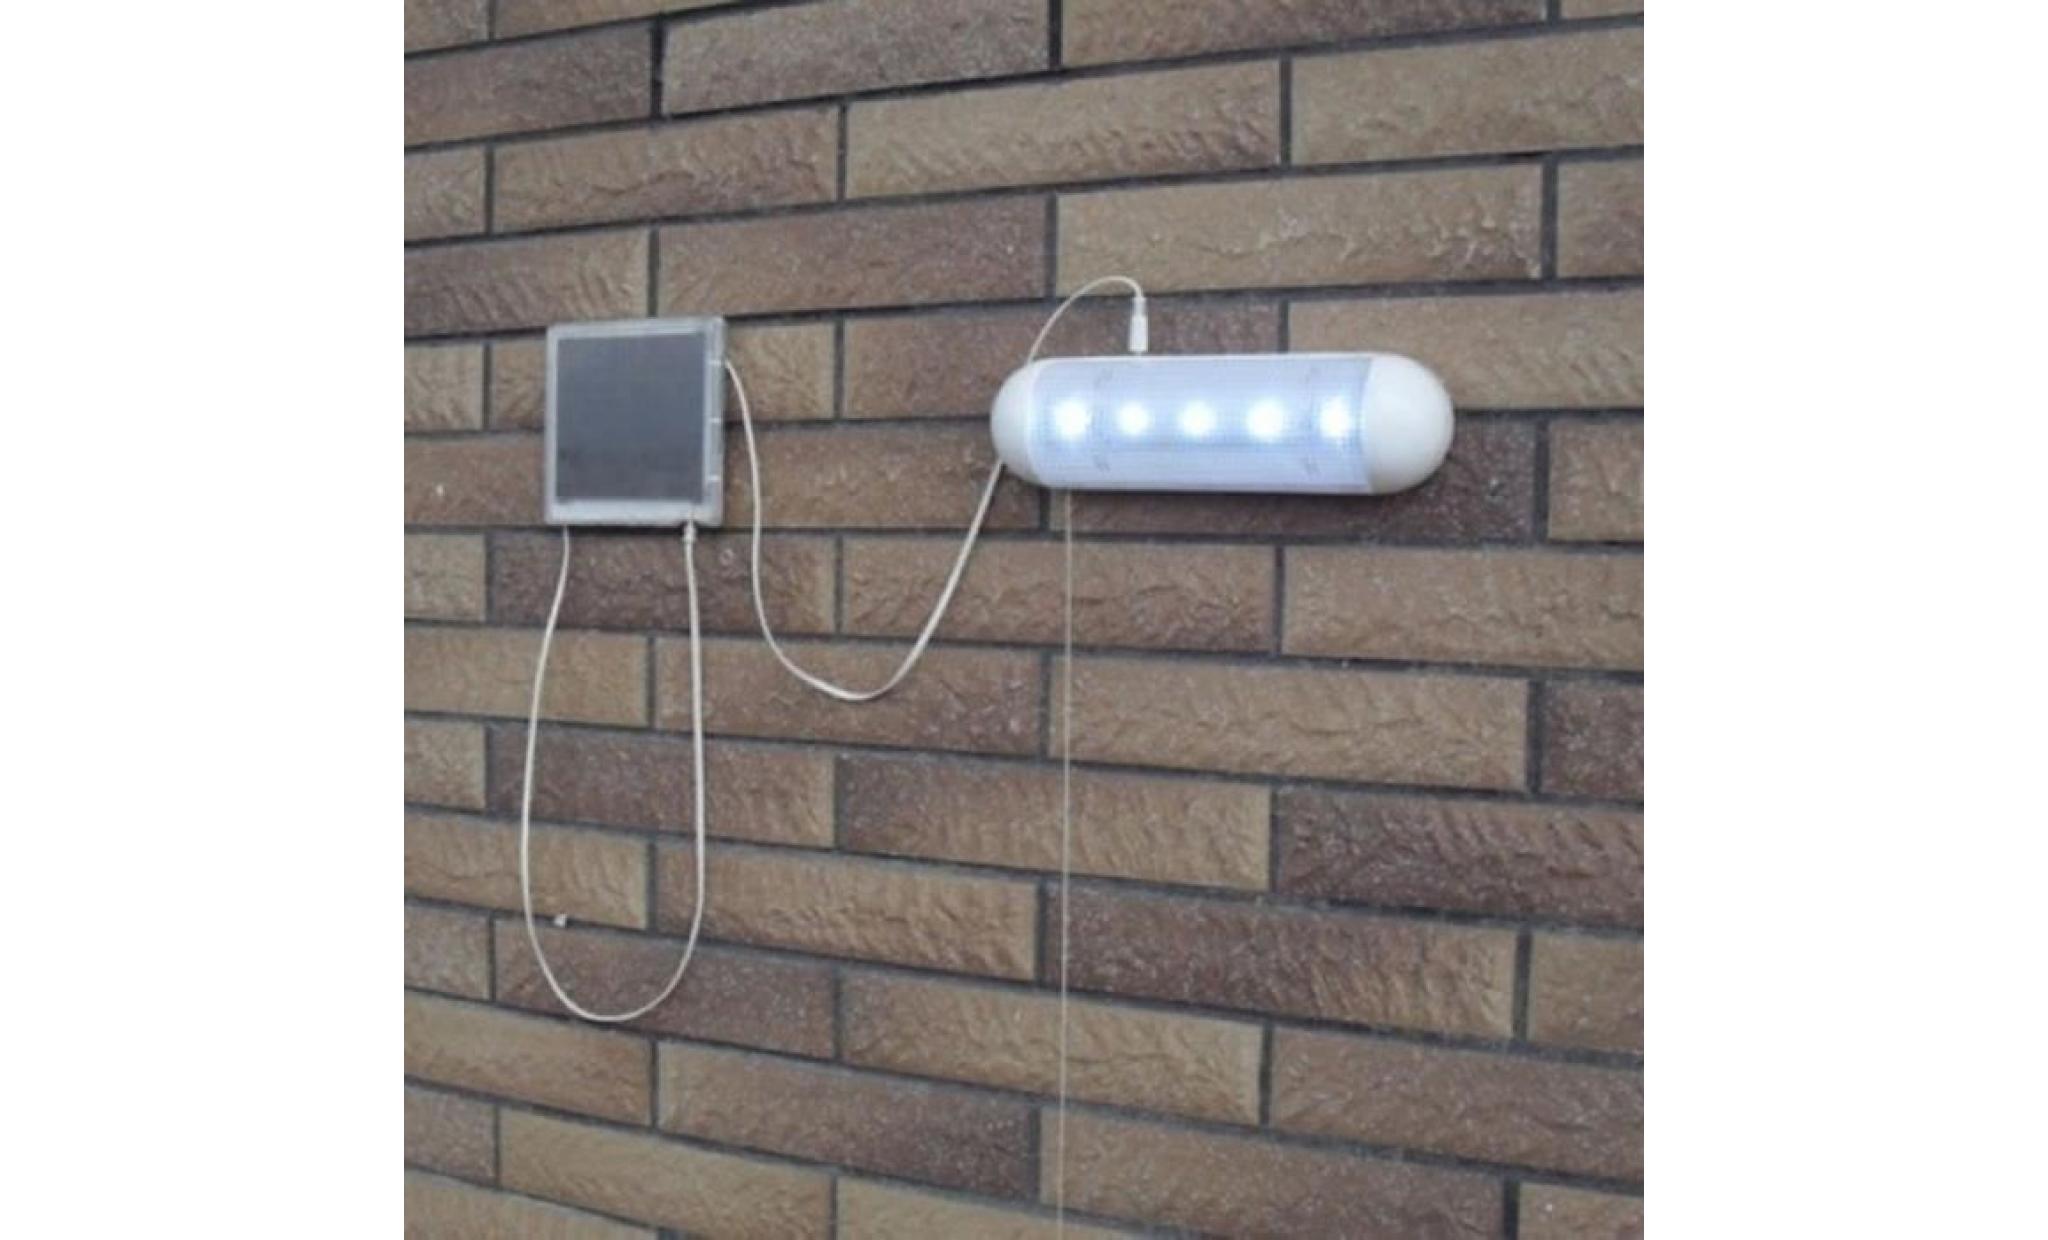 lumière populaire pull solaire fractionner lampes solaires intérieur 5 led extérieur lumière d'urgence kanyrne927